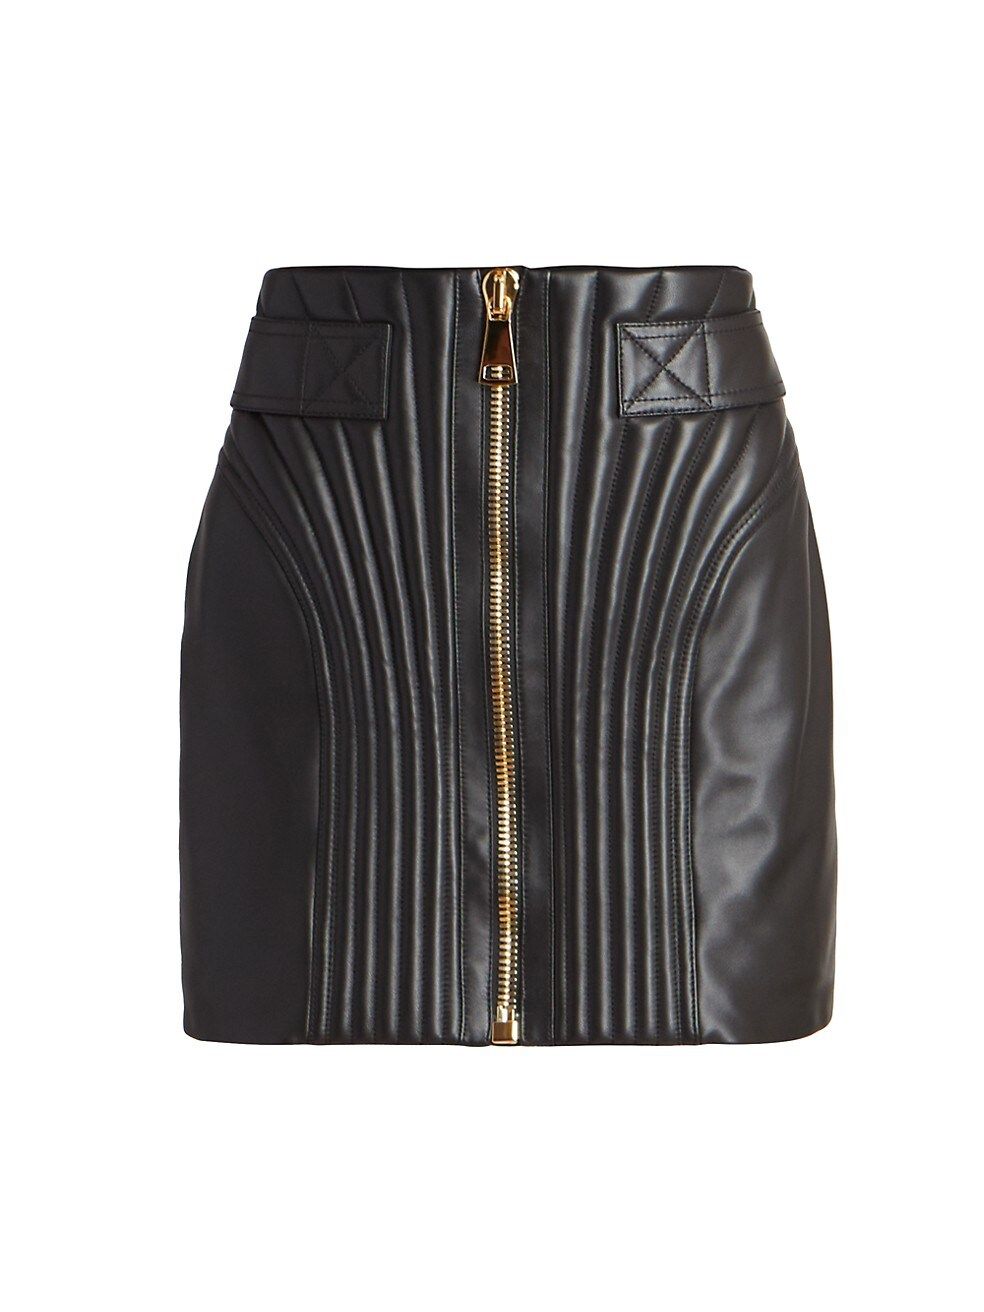 Balmain Quilted Leather Miniskirt | Saks Fifth Avenue